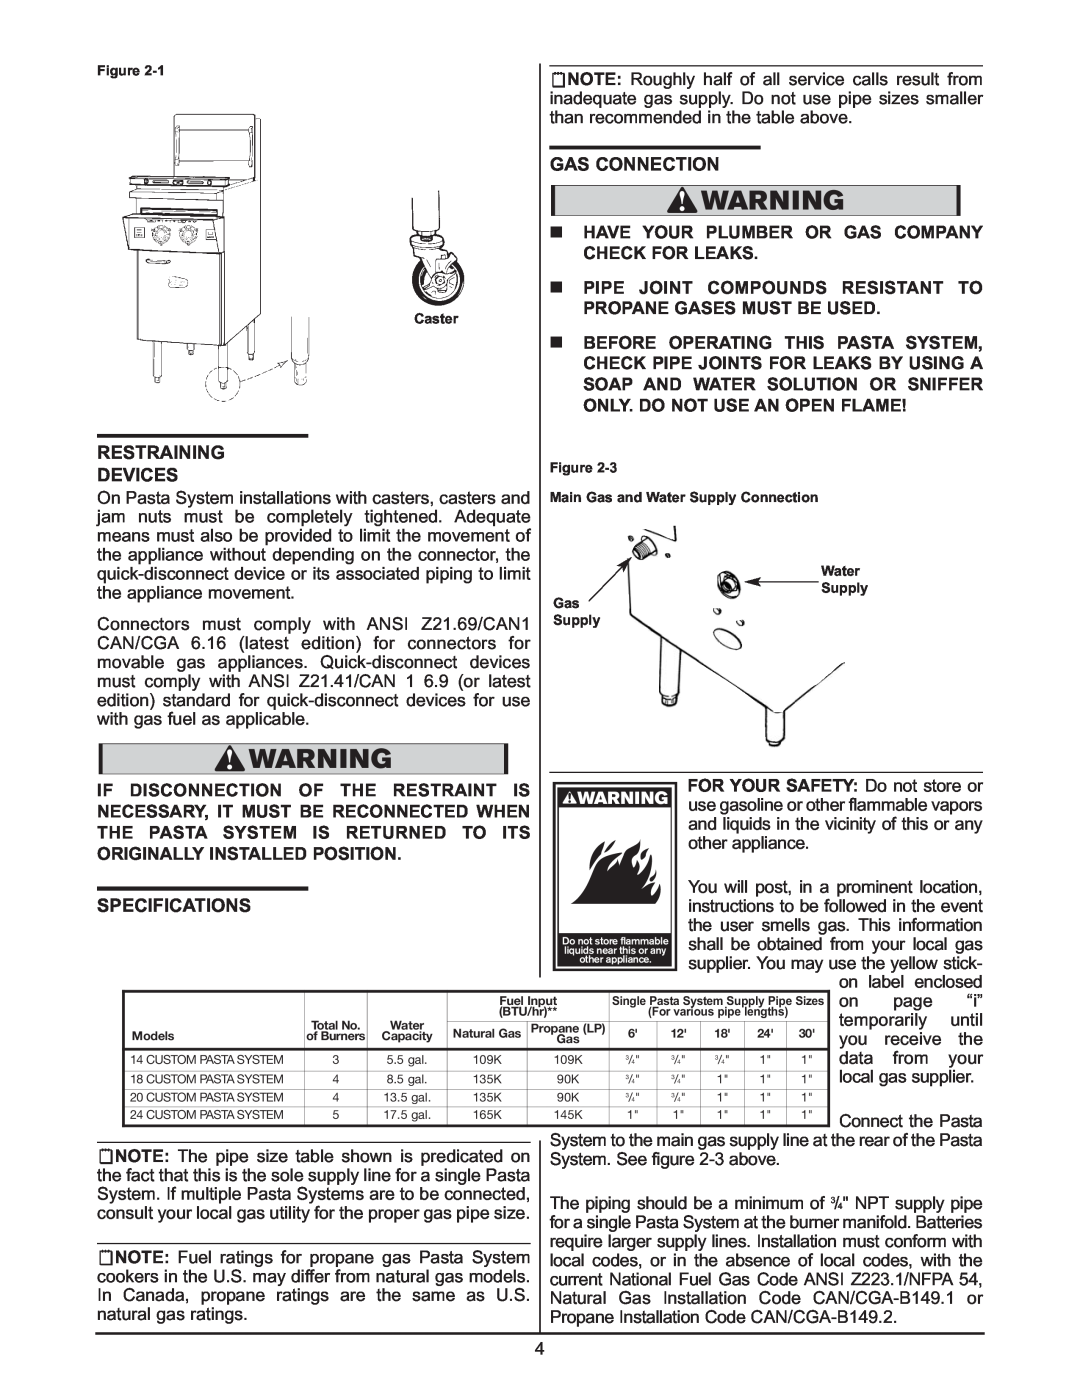 Keating Of Chicago 0107 service manual Gas Connection, Restraining, Devices, Specifications 